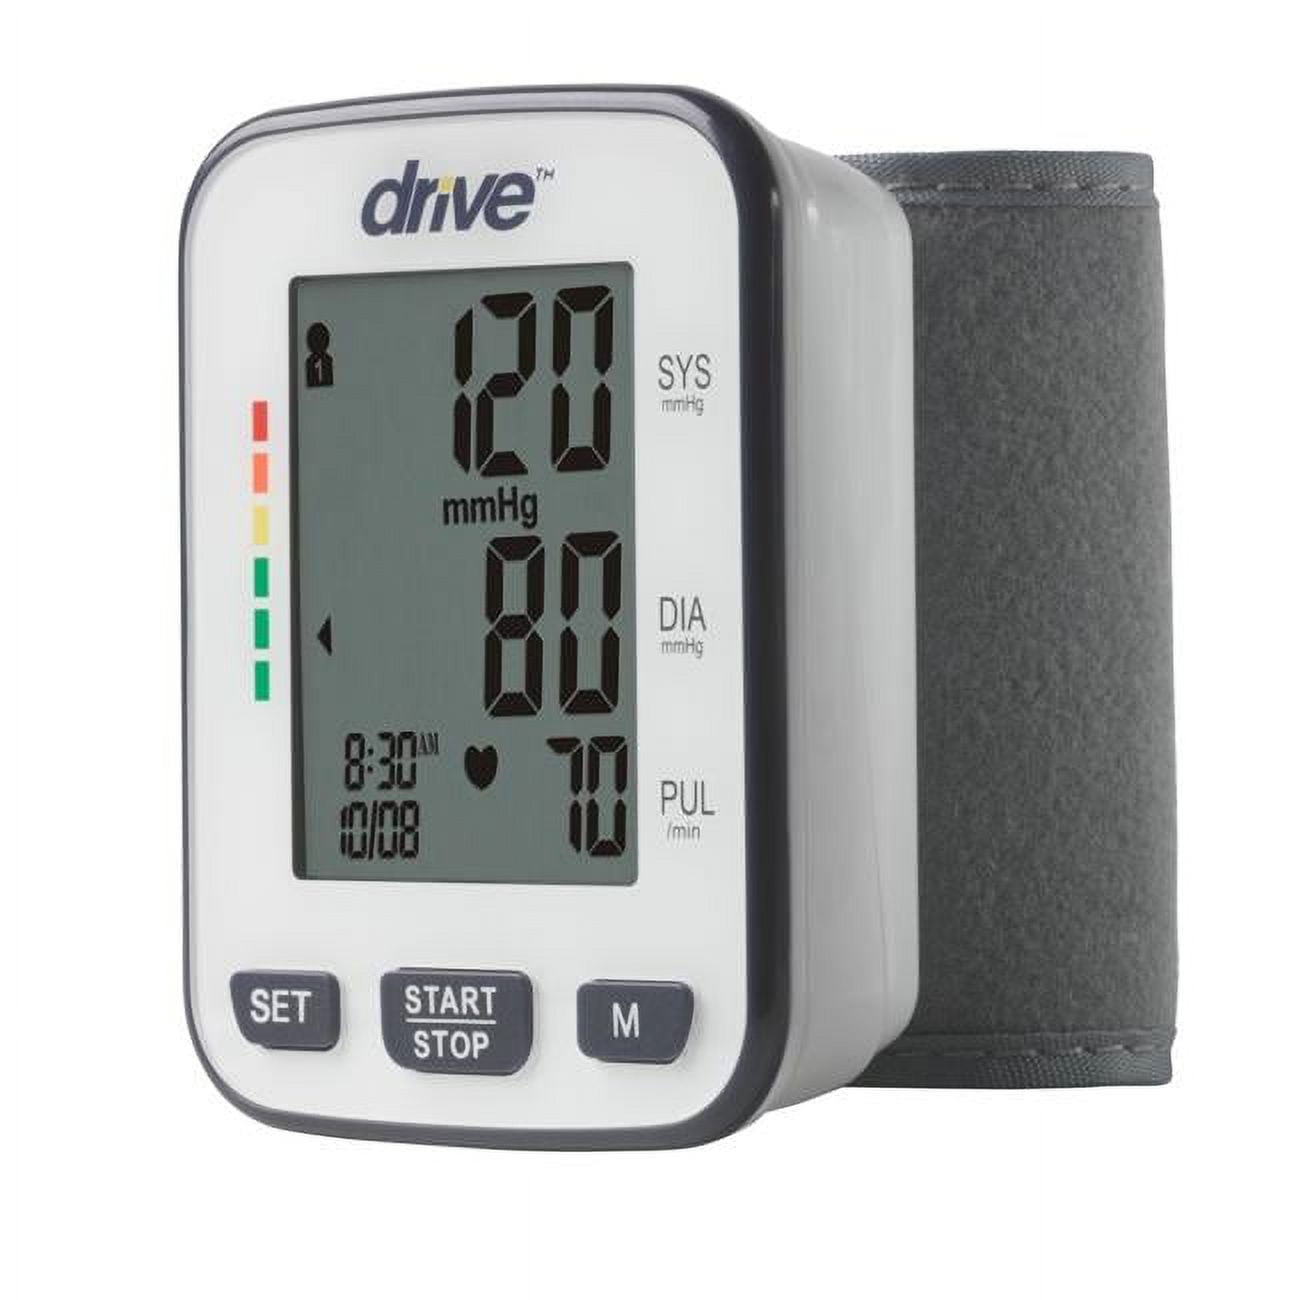 Drivemedical Bp3200 Automatic Deluxe Blood Pressure Monitor, Wrist